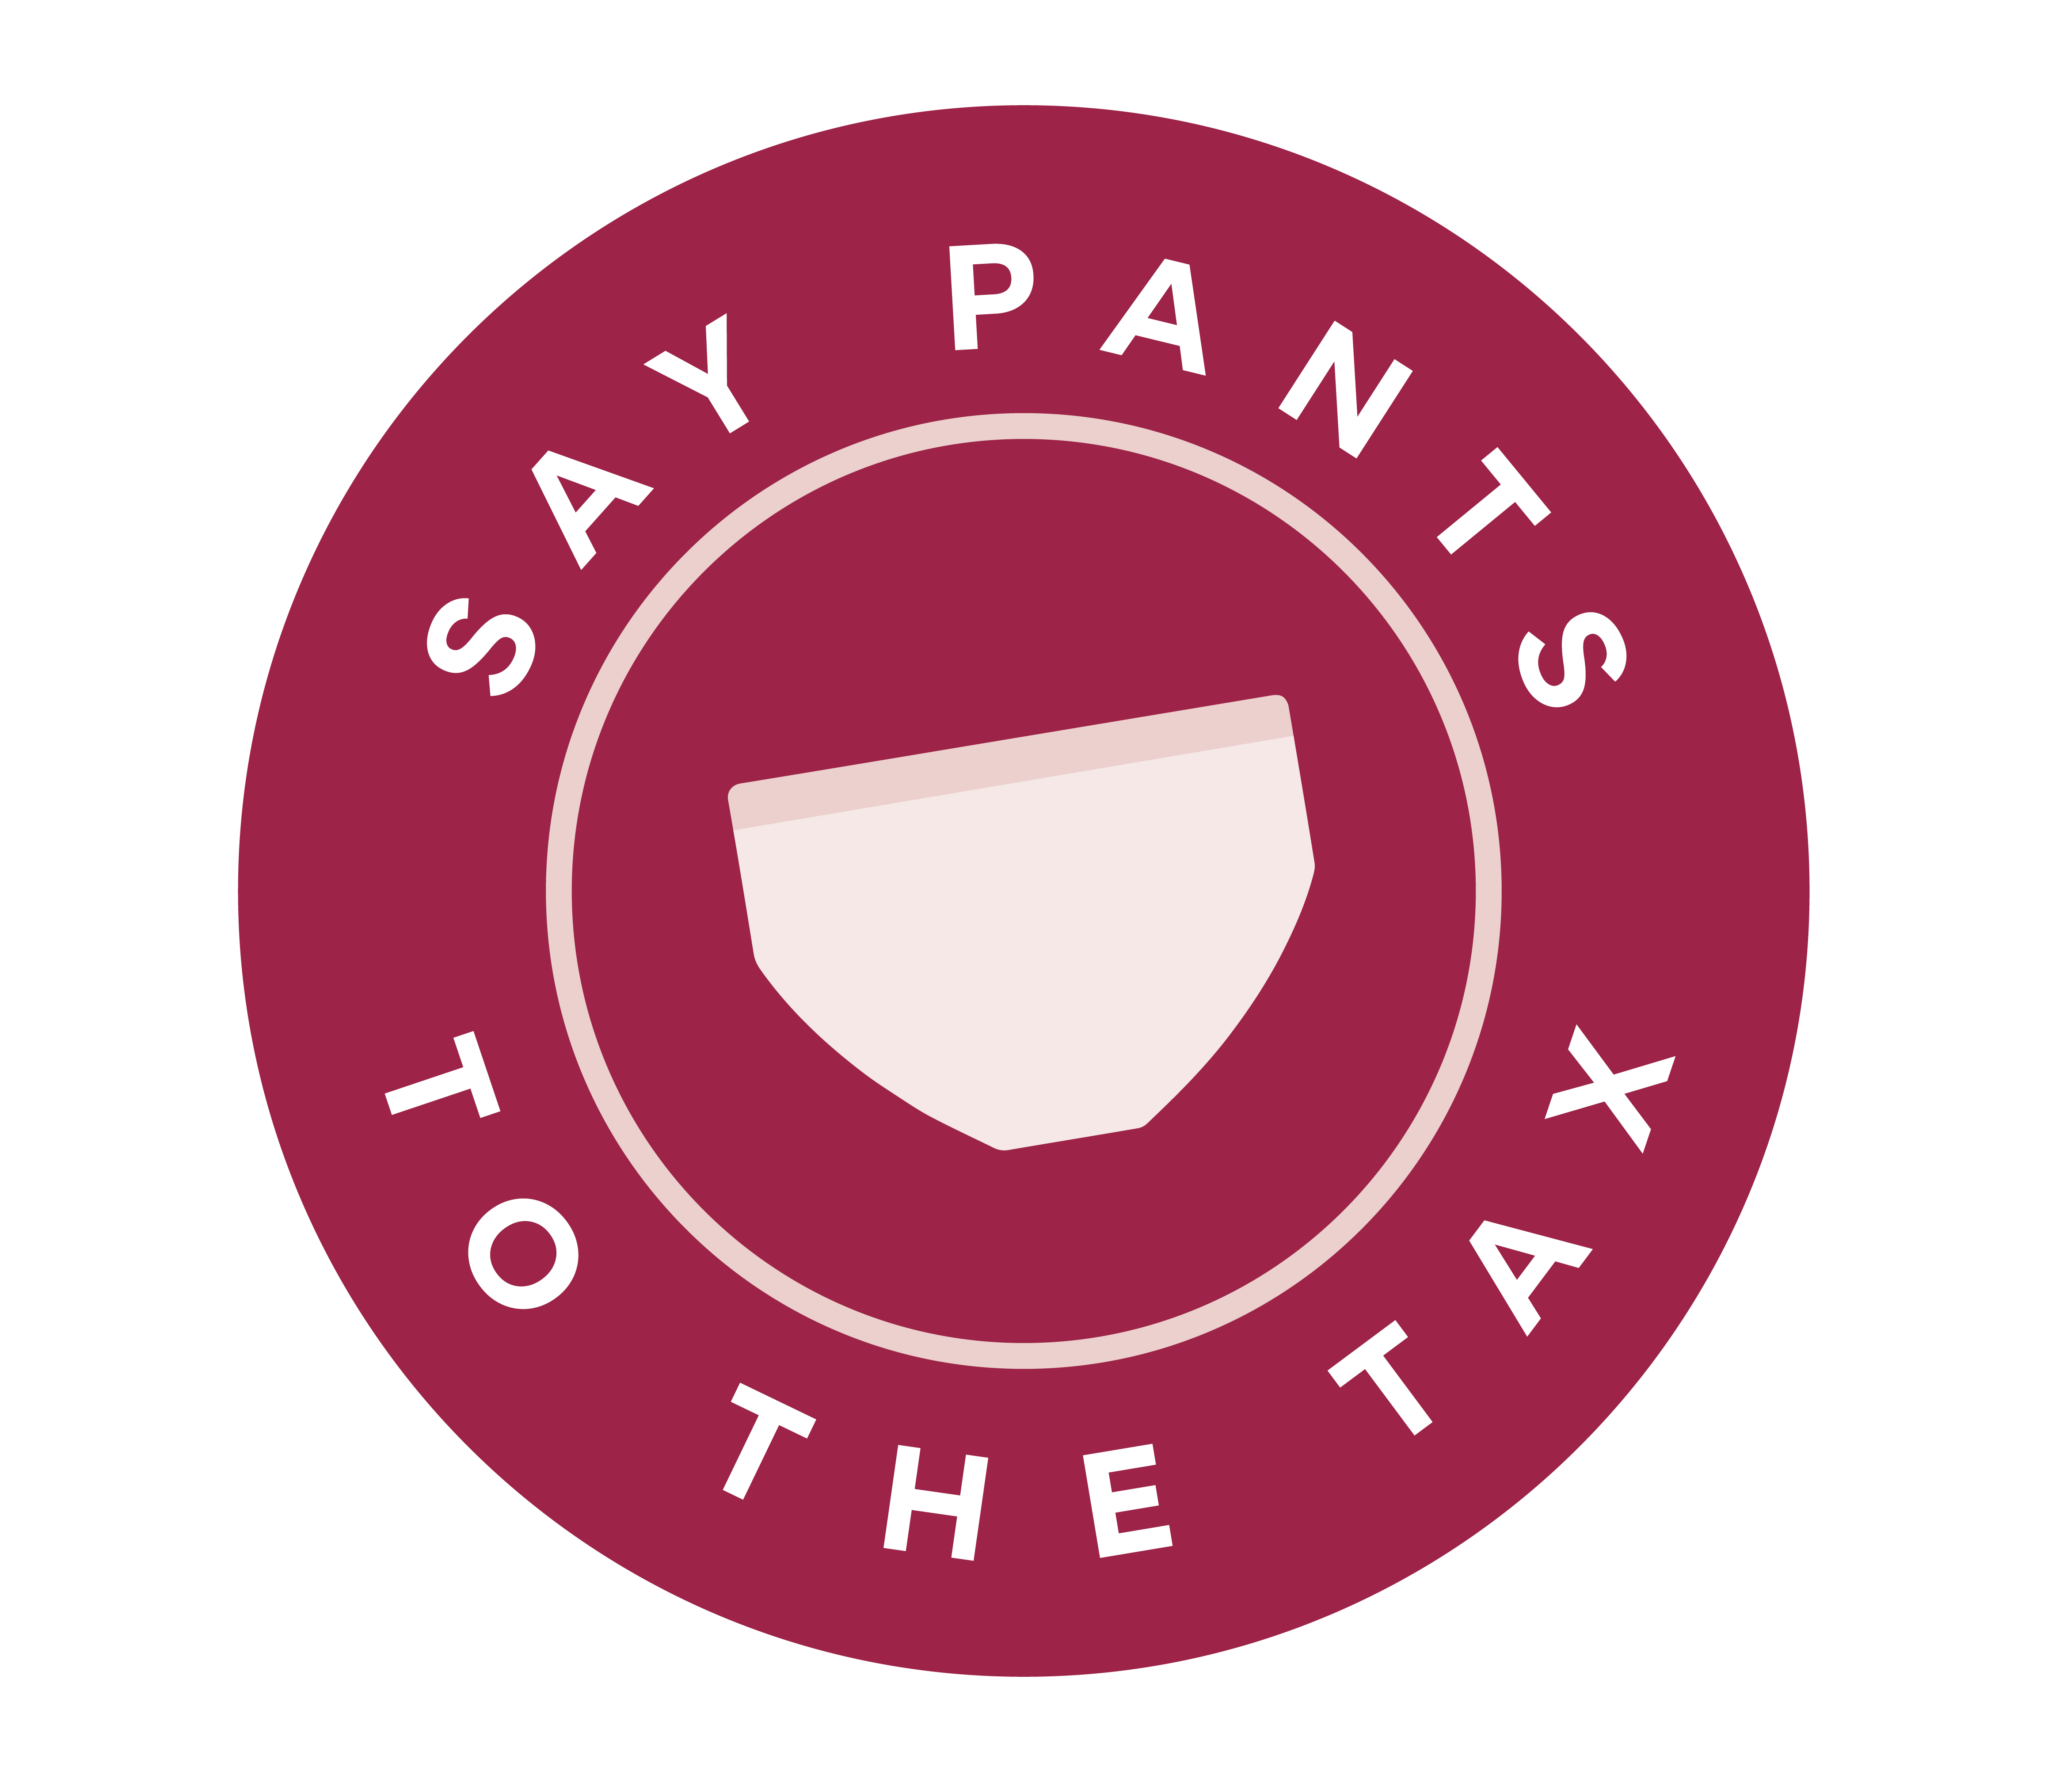 PROUD TO SUPPORT M&S PANTS TO THE TAX CAMPAIGN